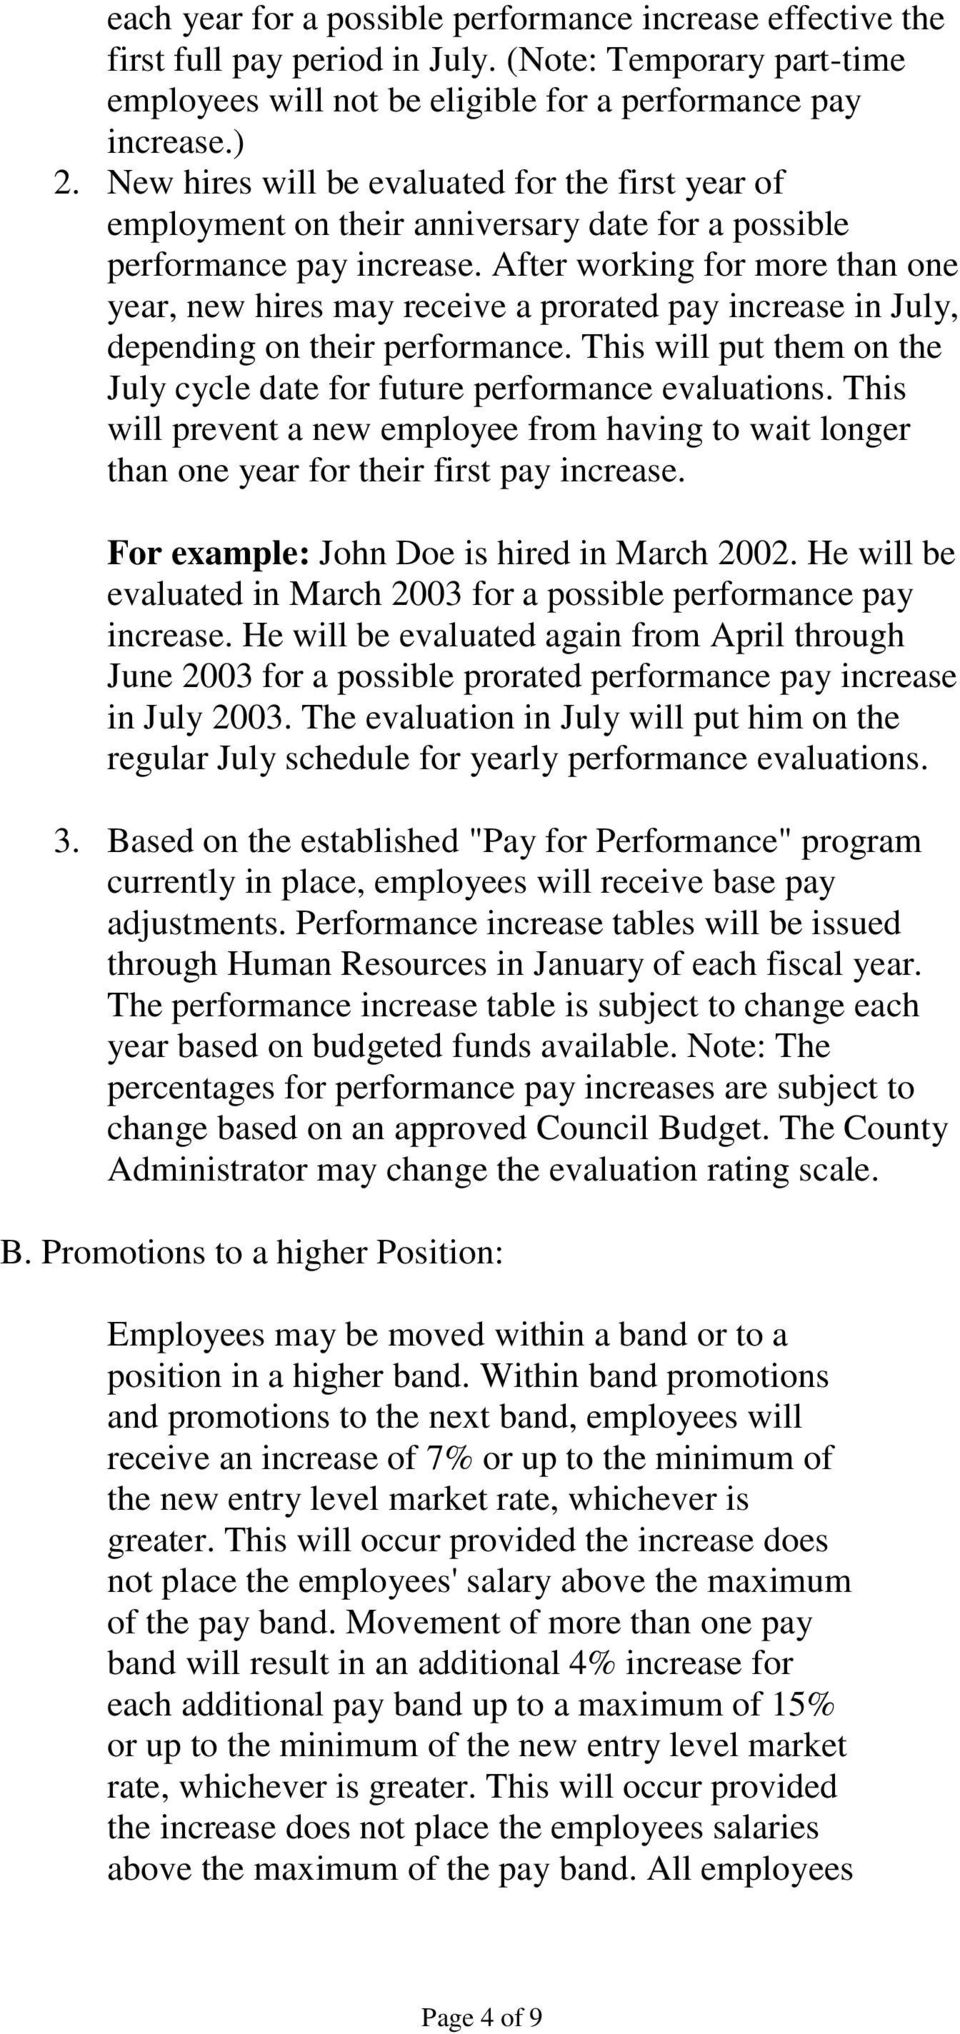 After working for more than one year, new hires may receive a prorated pay increase in July, depending on their performance.